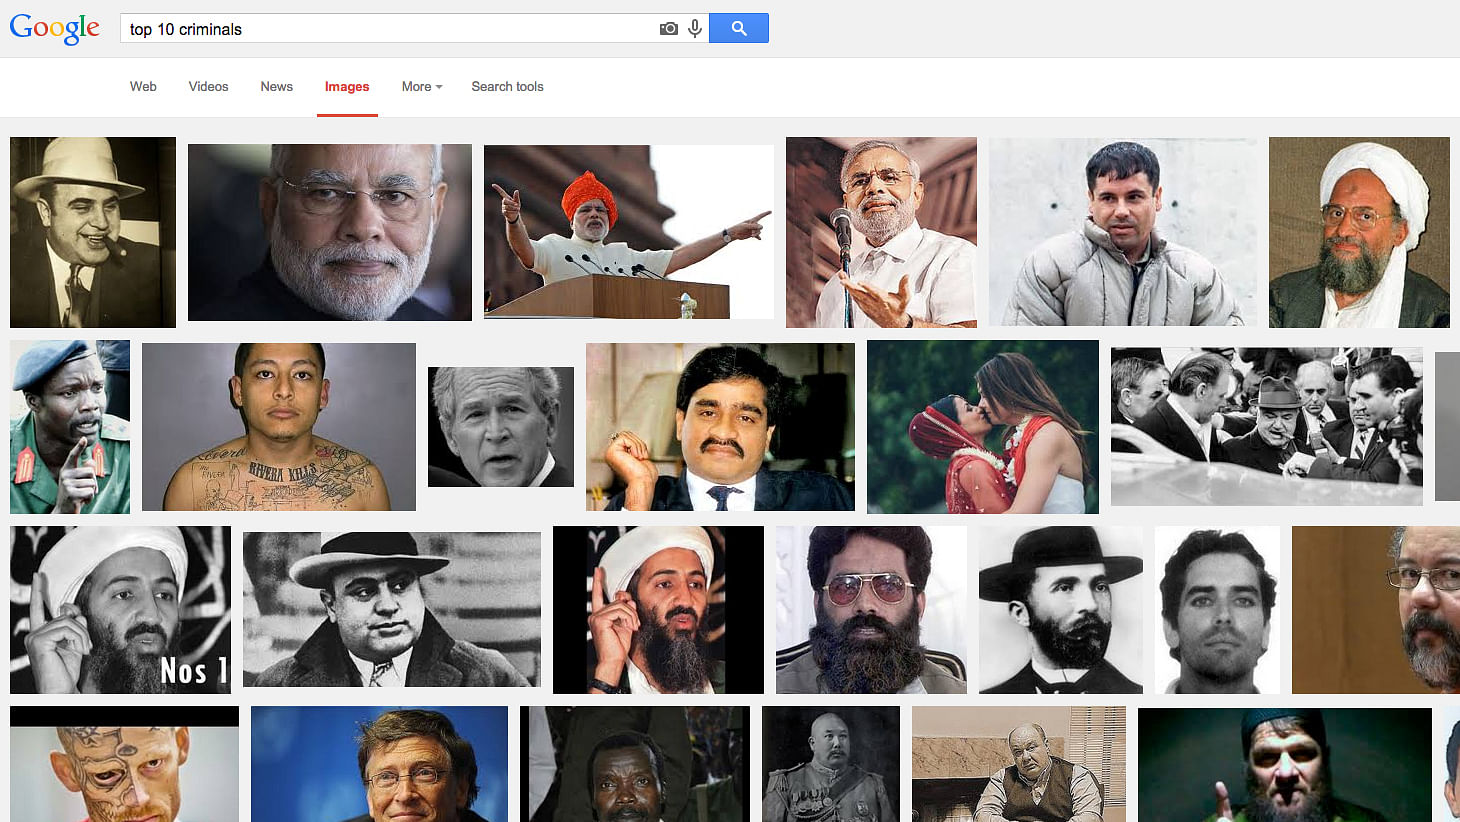 Google search for “India’s top 10 criminals” throws up at least three images of Modi on the first page. (Photo: Google Images Screen Grab)